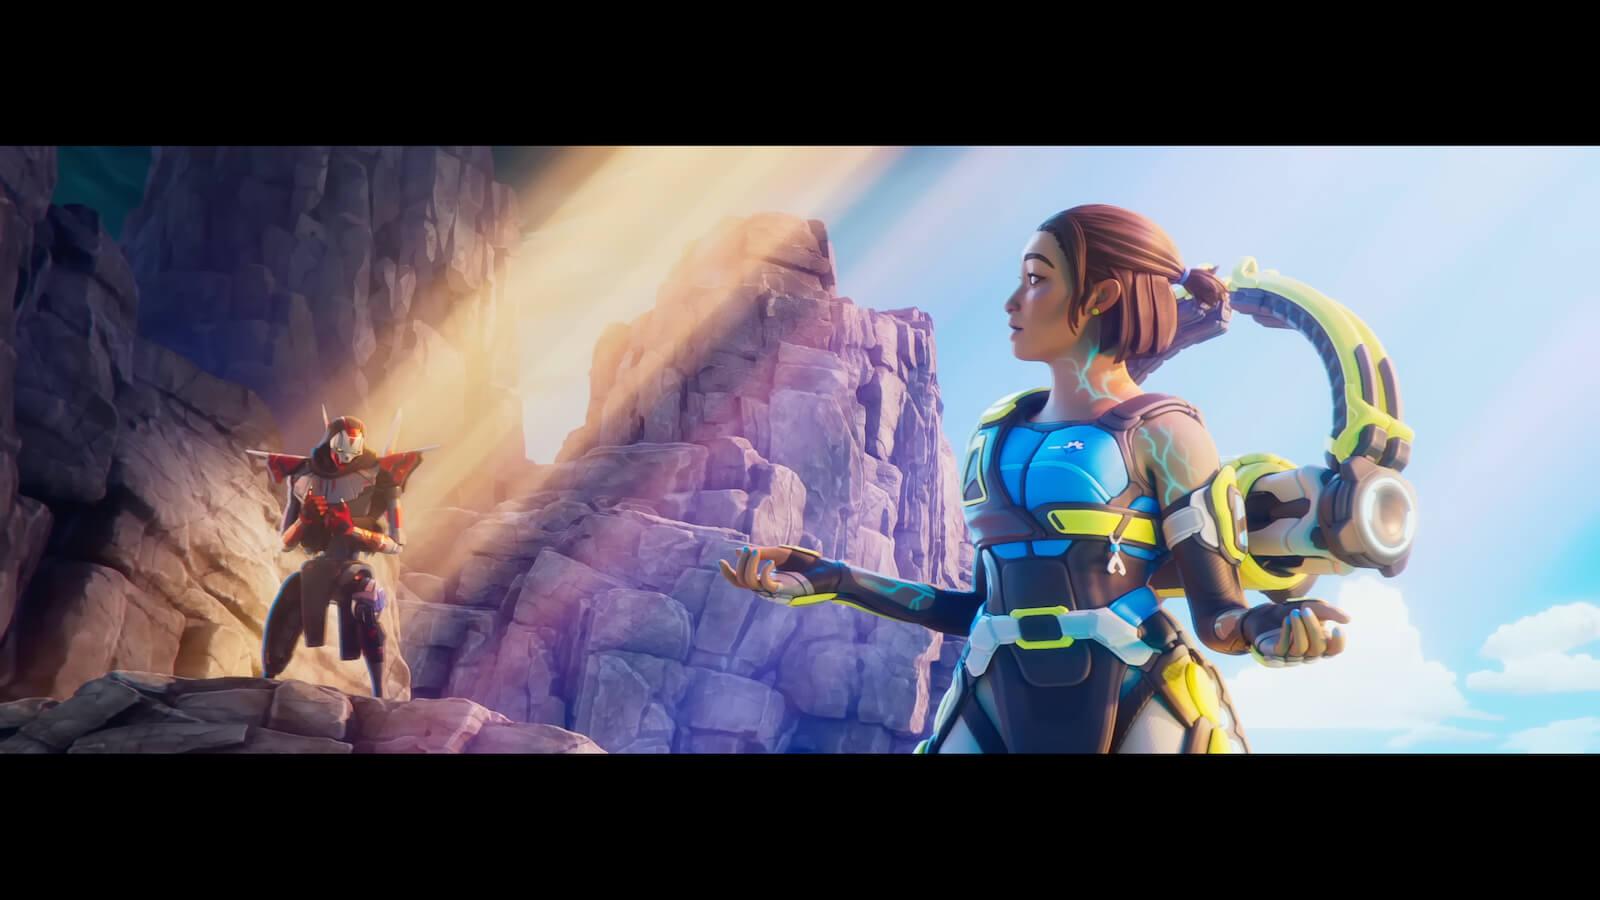 Apex Legends fans blown away by Revenant’s musical note in Ignite trailer